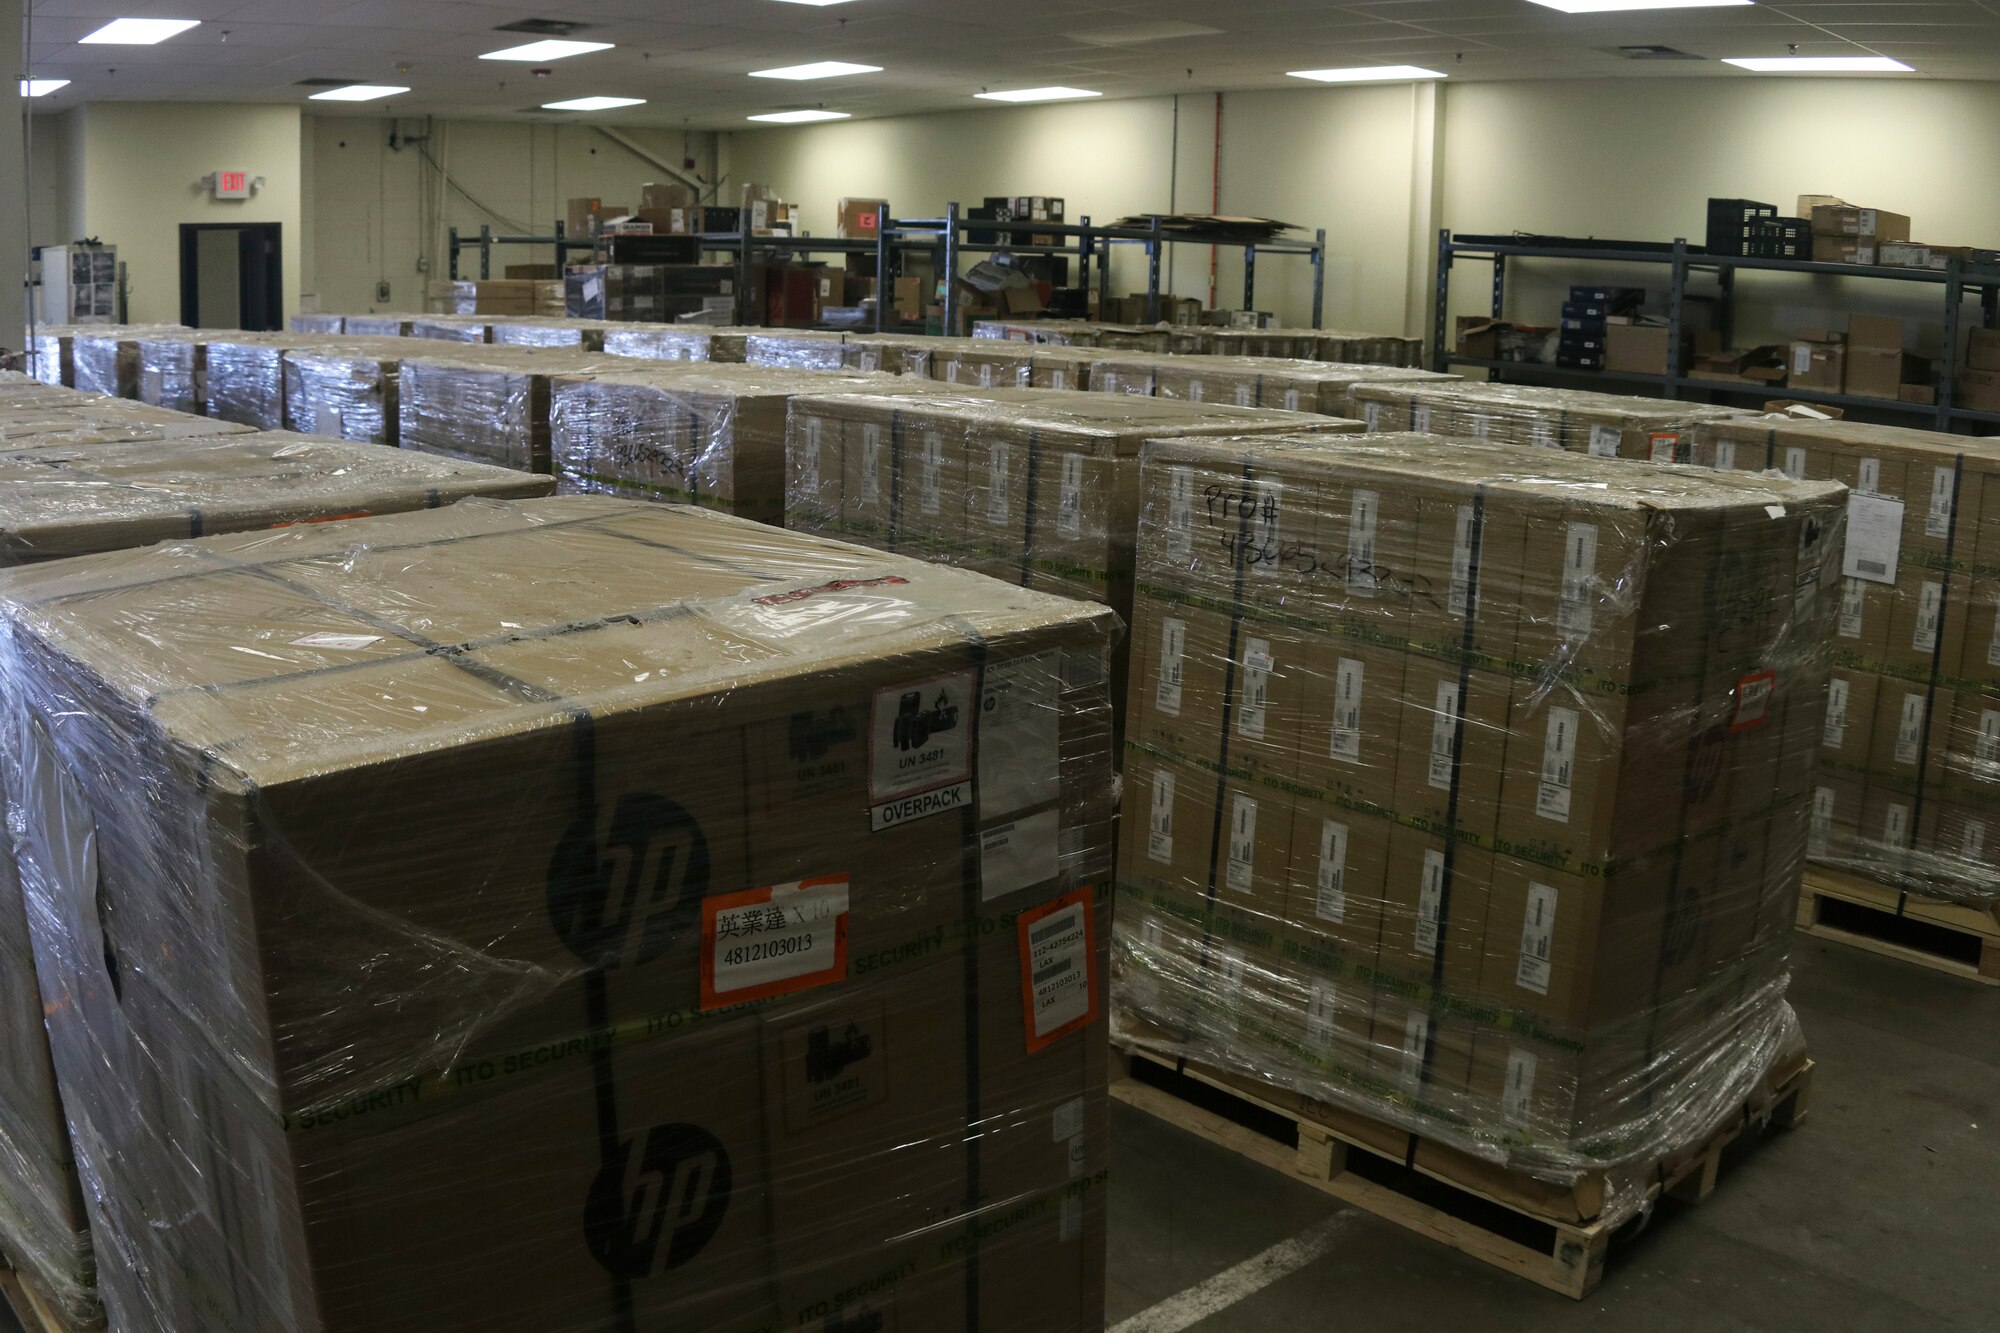 Photo shows multiple pallets with boxed laptops in a storage unit.